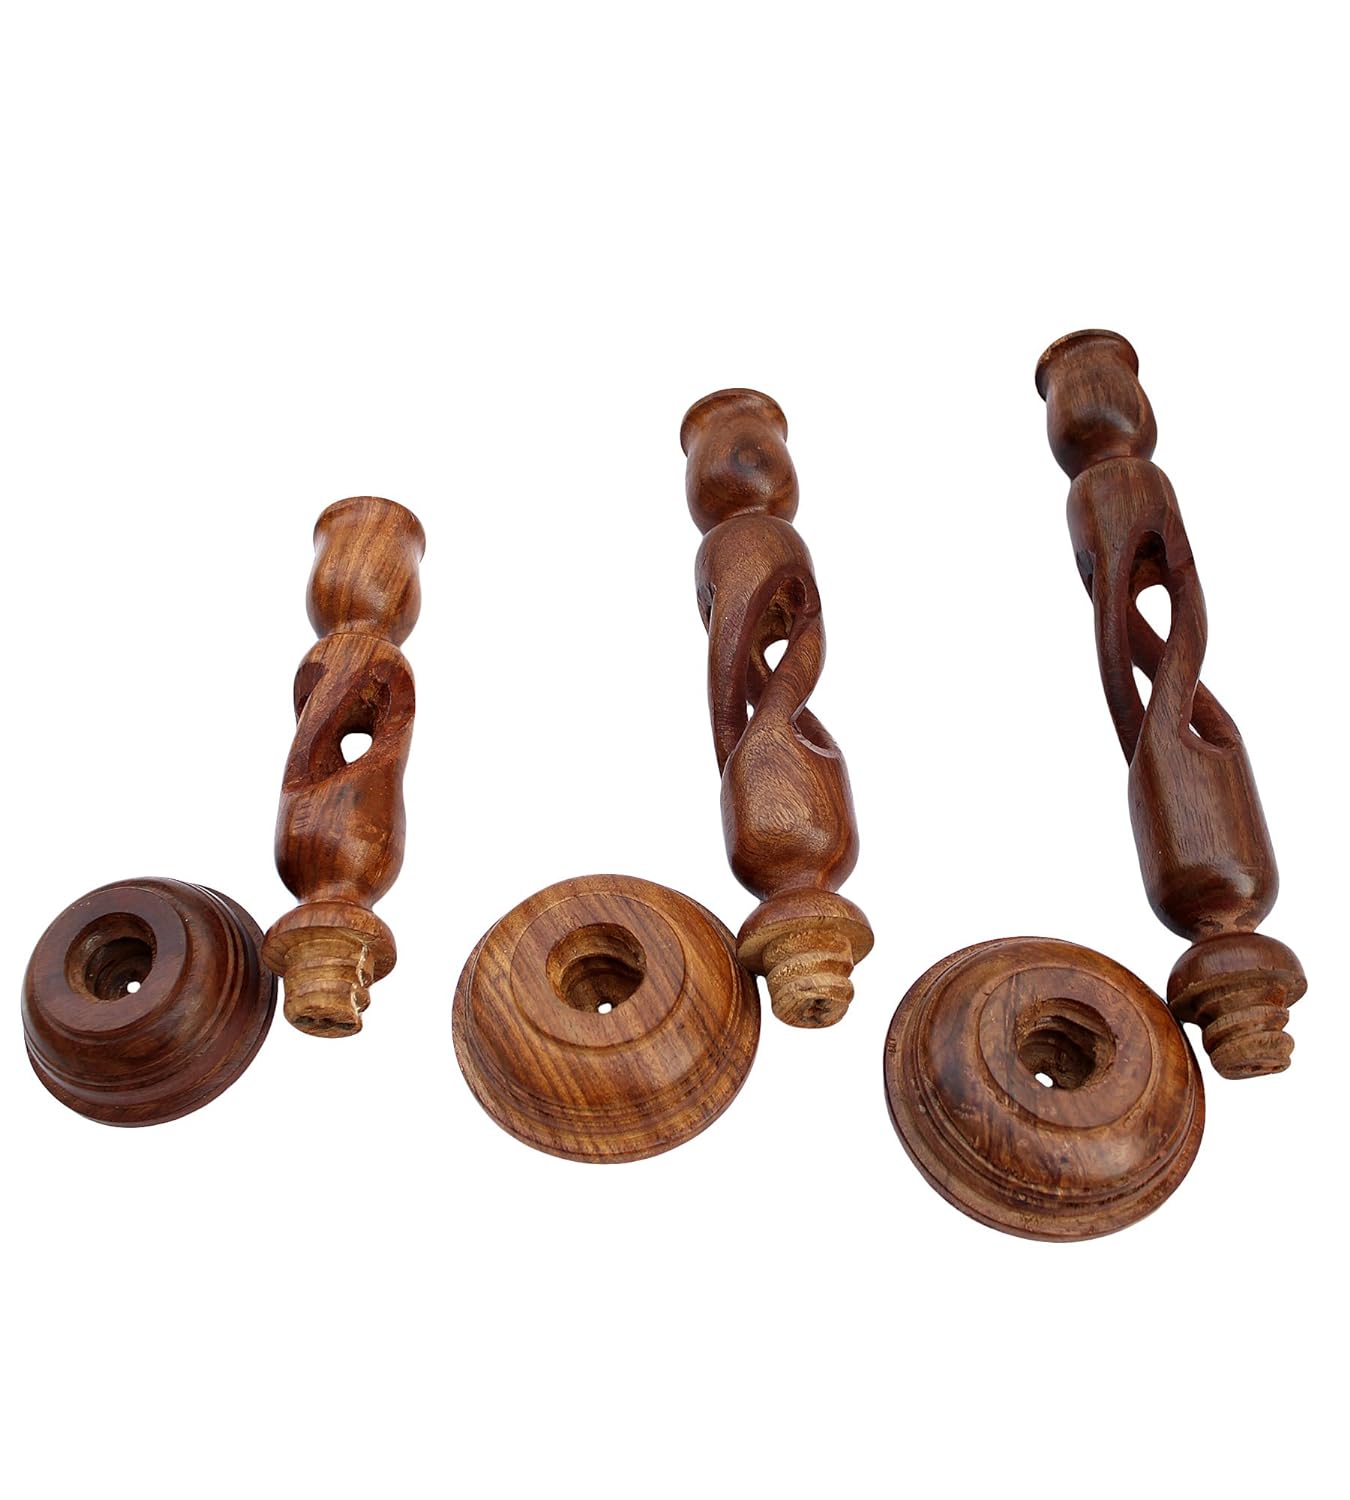 Wooden Candle Holder Stand for Home Decor Decorative Tealight Holder Set of 3 Candle Organiser